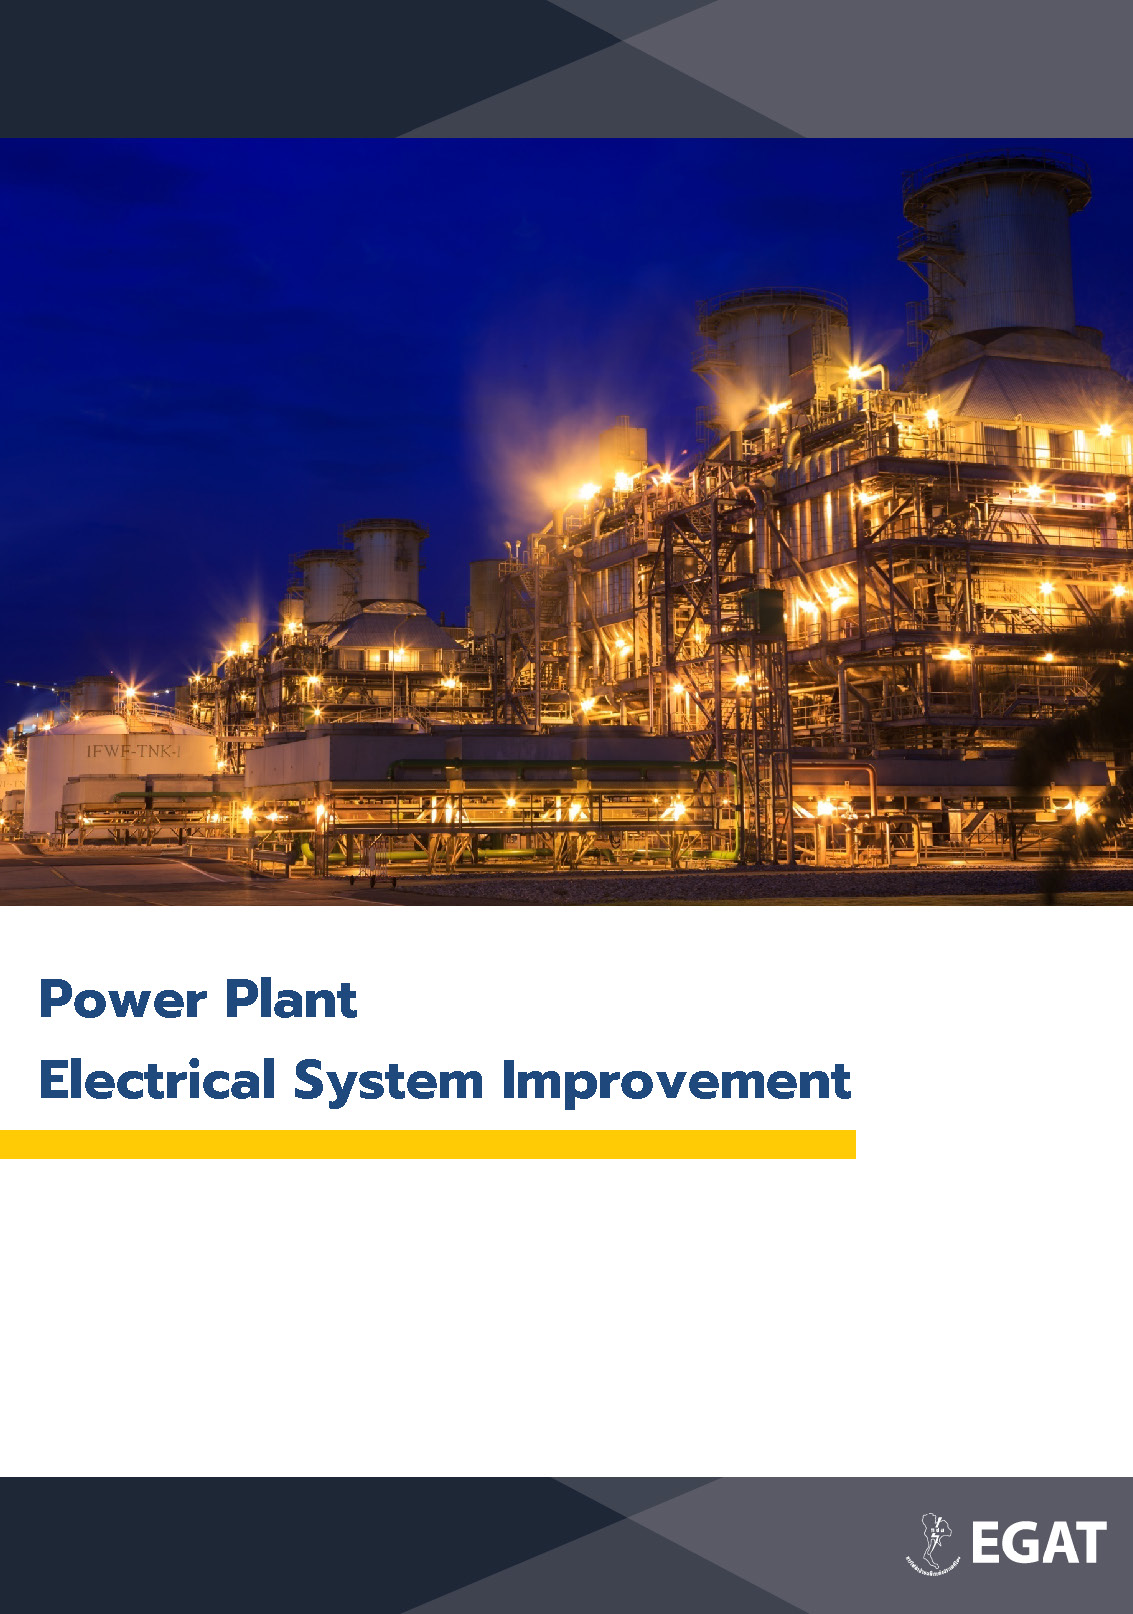 Power Plant Electrical System Improvement